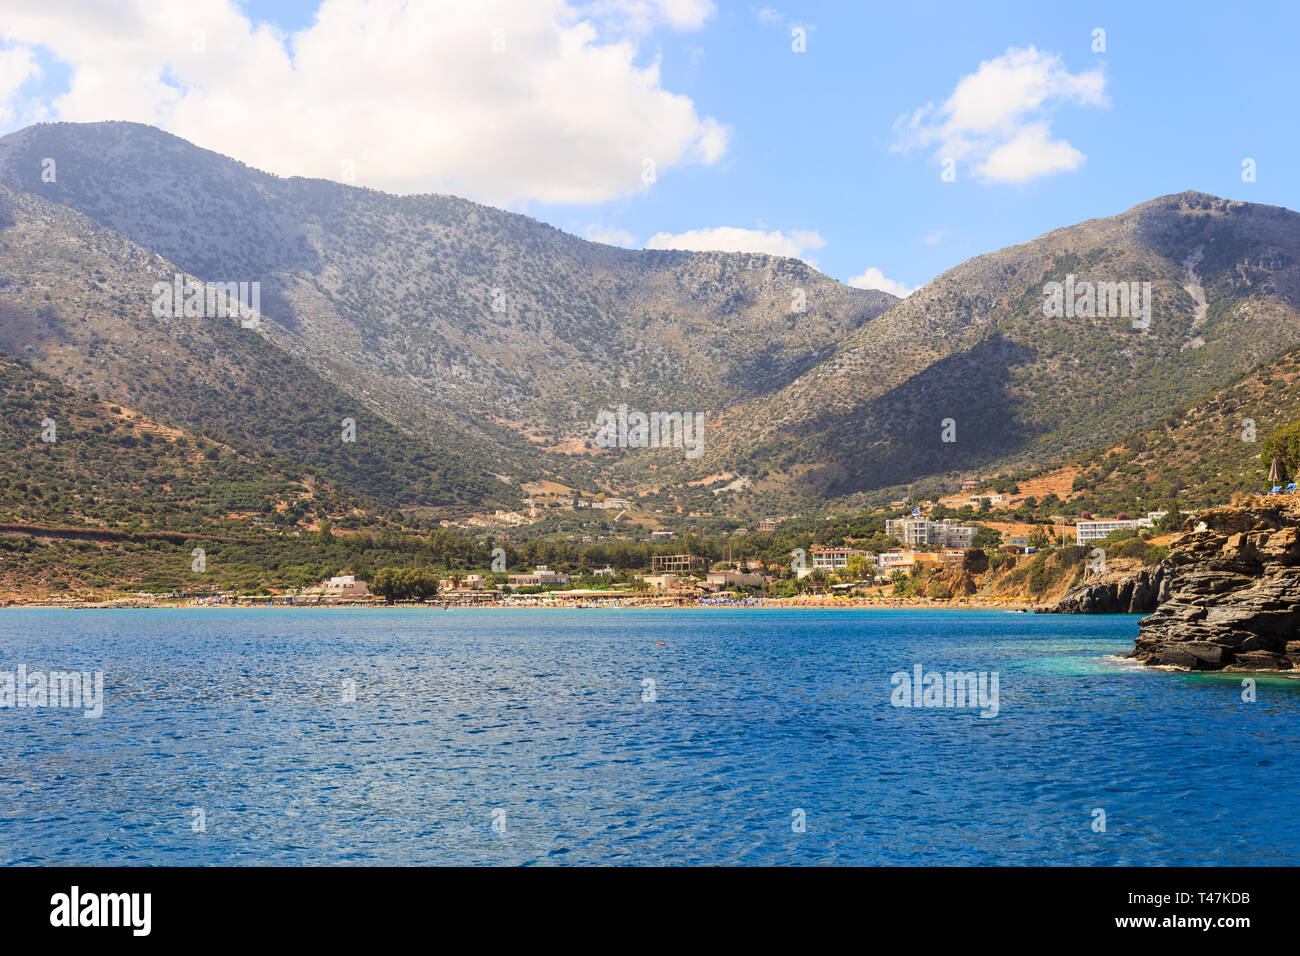 Sea Bay of resort village Bali. Views of mountain, shore, washed by waves and sun loungers. Bali, Rethymno, Crete, Greece Stock Photo